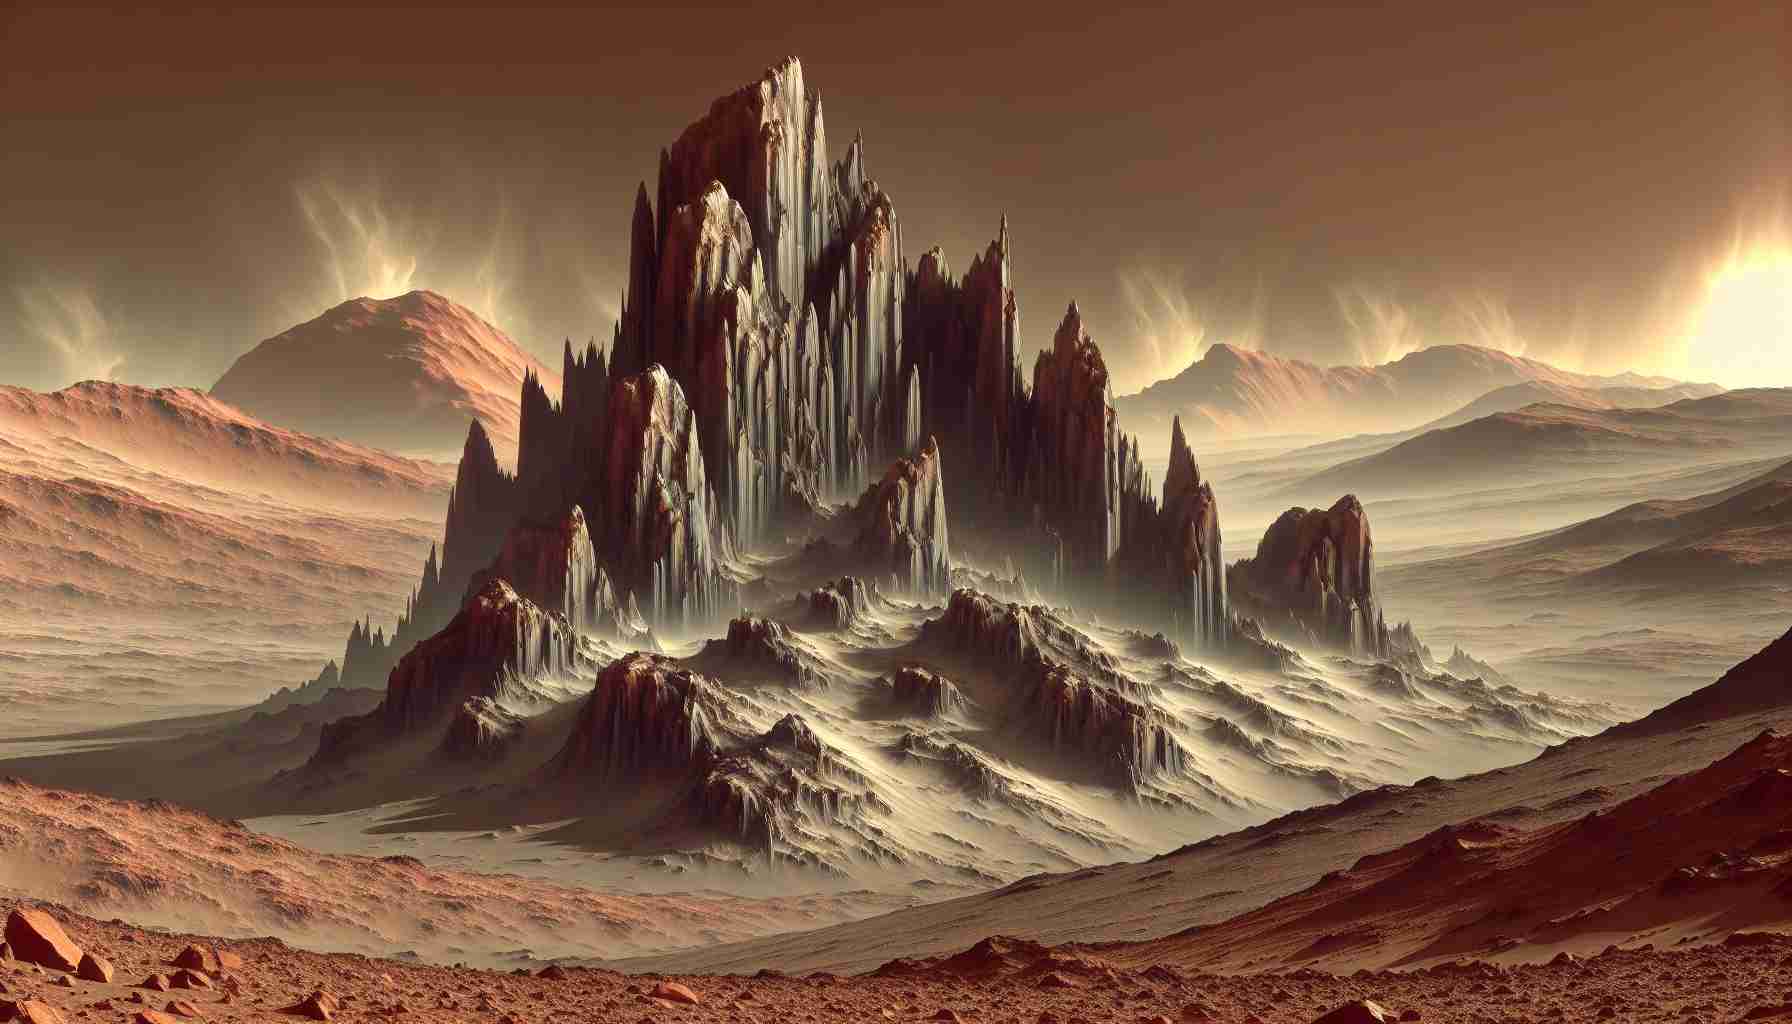 Generate a high-definition, realistic image showing the exploration of Mars. This scene should depict an extraordinary Martian discovery. Perhaps this could be an intricate rock formation, unusual geological structures, or uncategorized material. There should be a sense of awe and mystery, with carefully retouched details to emphasize the harshness and isolation of the Mars landscape with its reddish soil, and towering dust storms in the background.